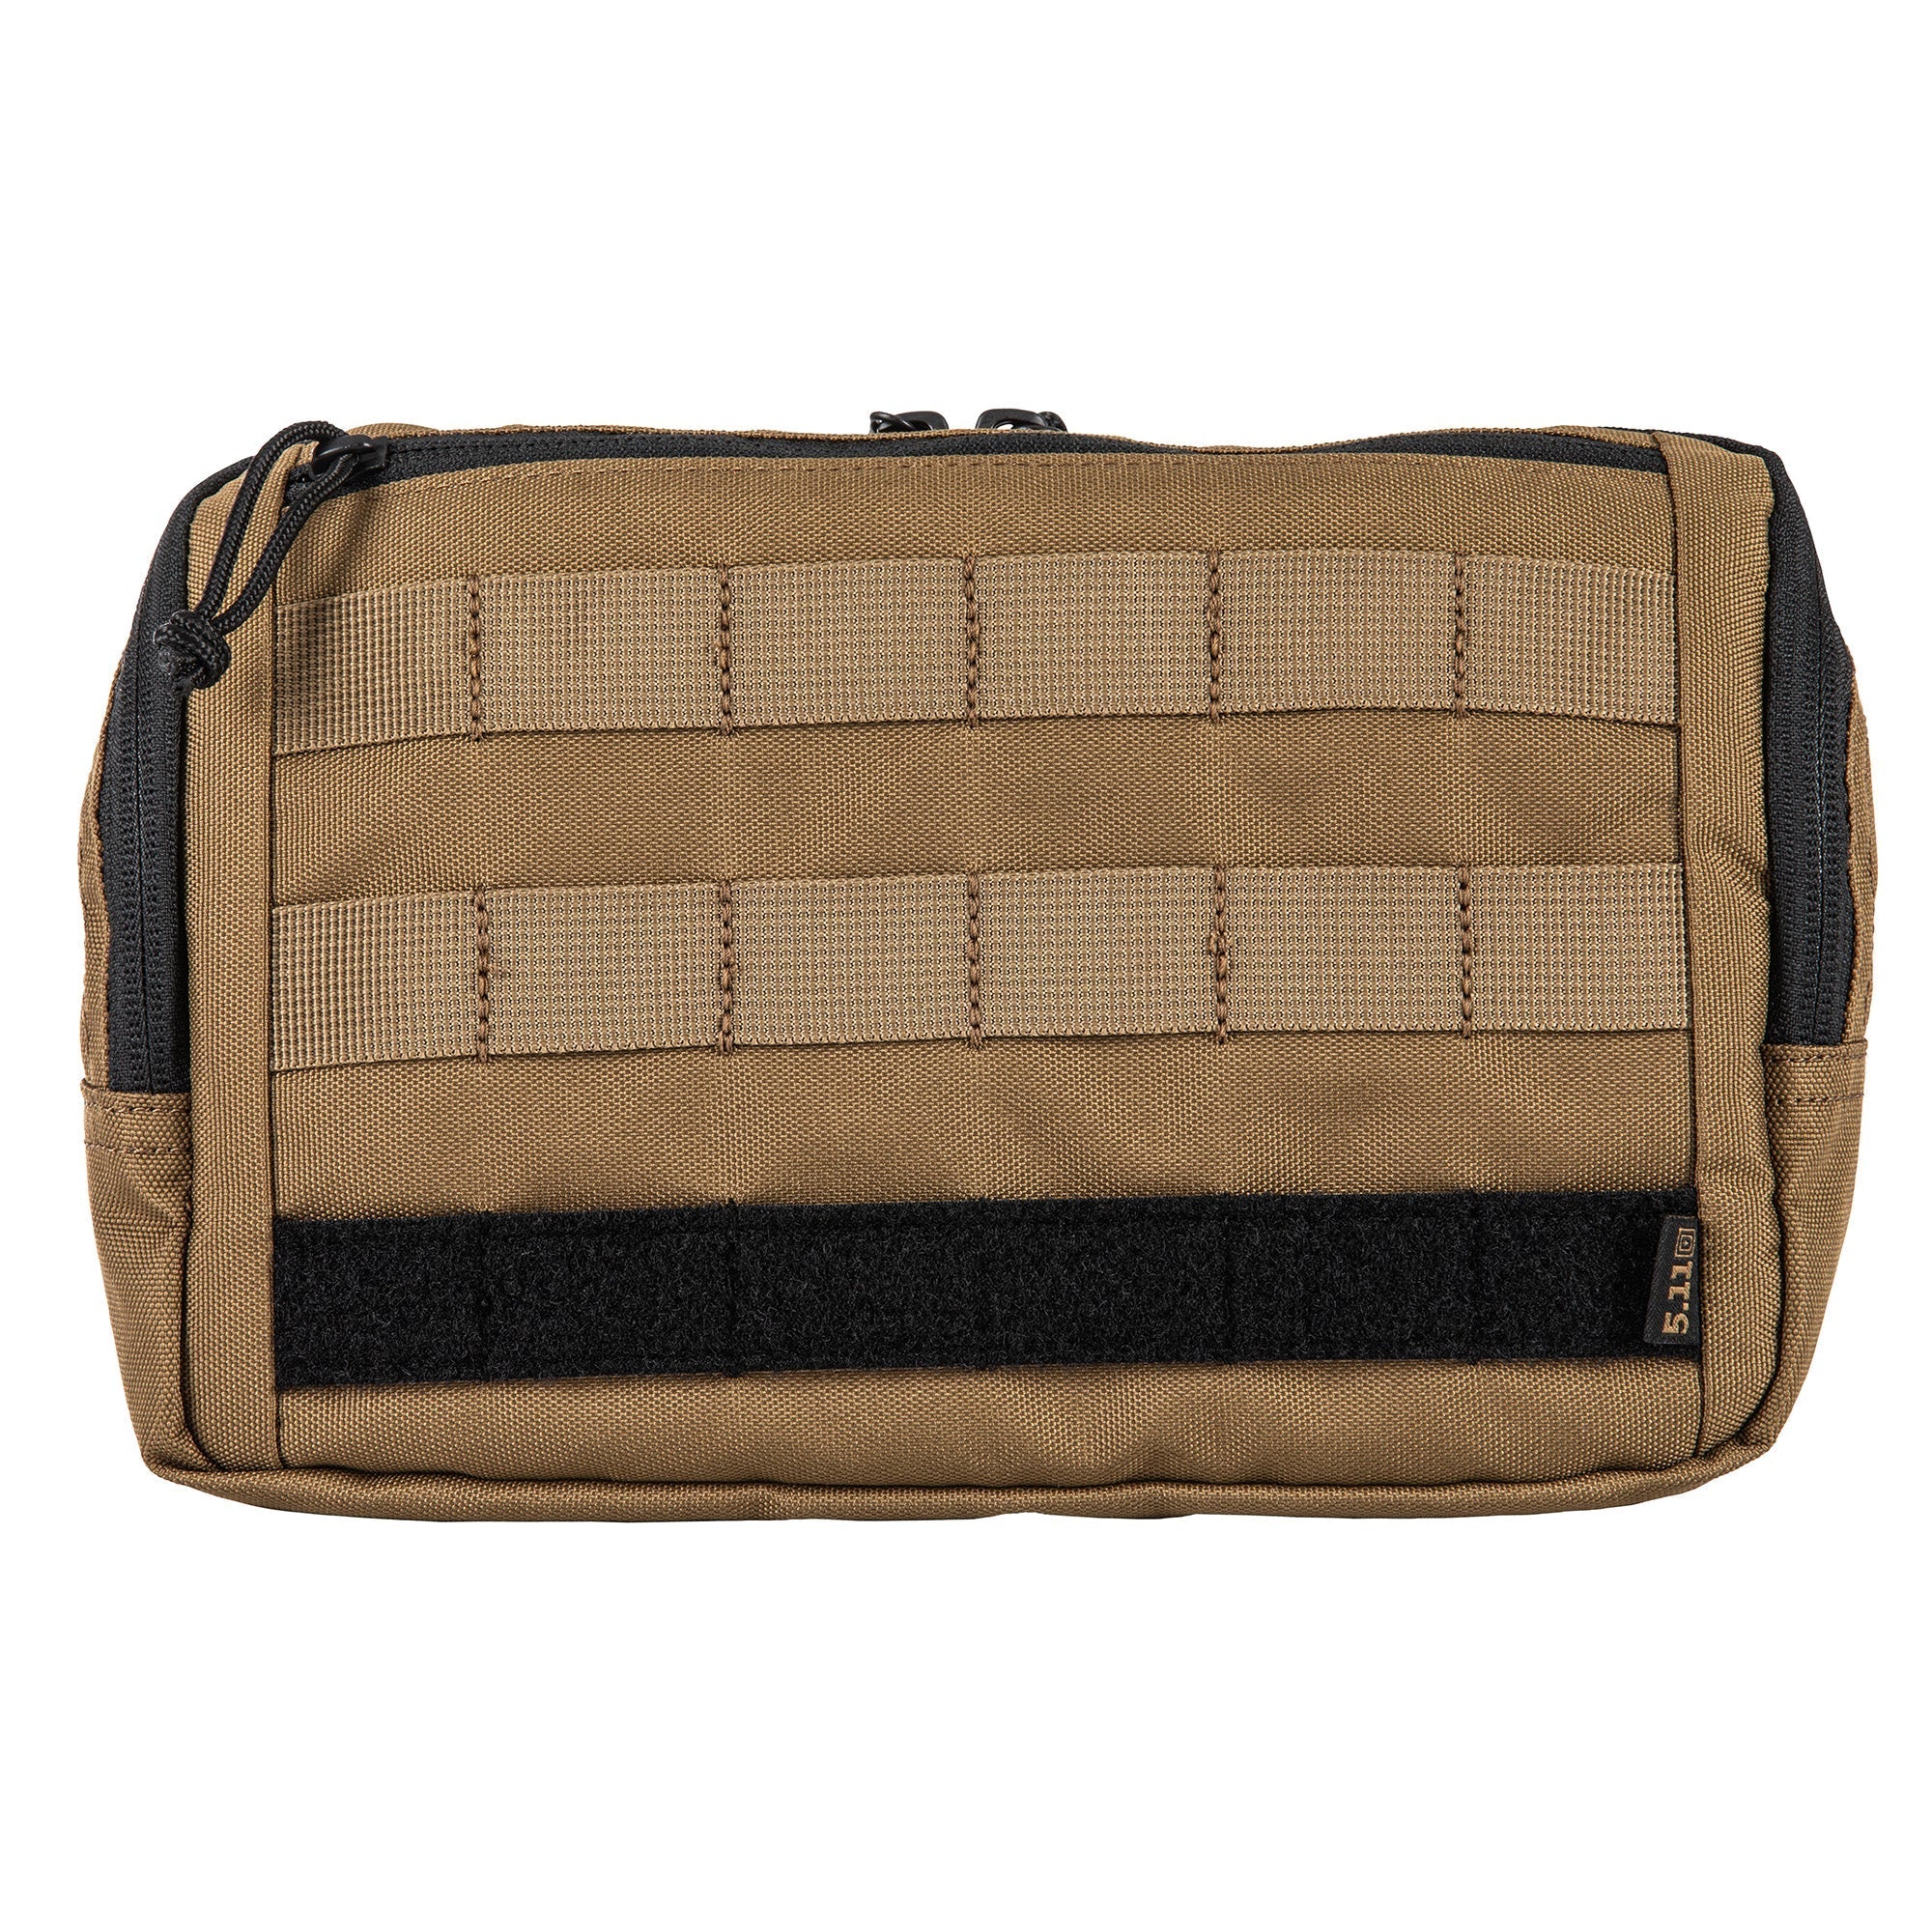 5.11 Tactical Rapid Waist Pack Bags, Packs and Cases 5.11 Tactical Kangaroo Tactical Gear Supplier Tactical Distributors Australia